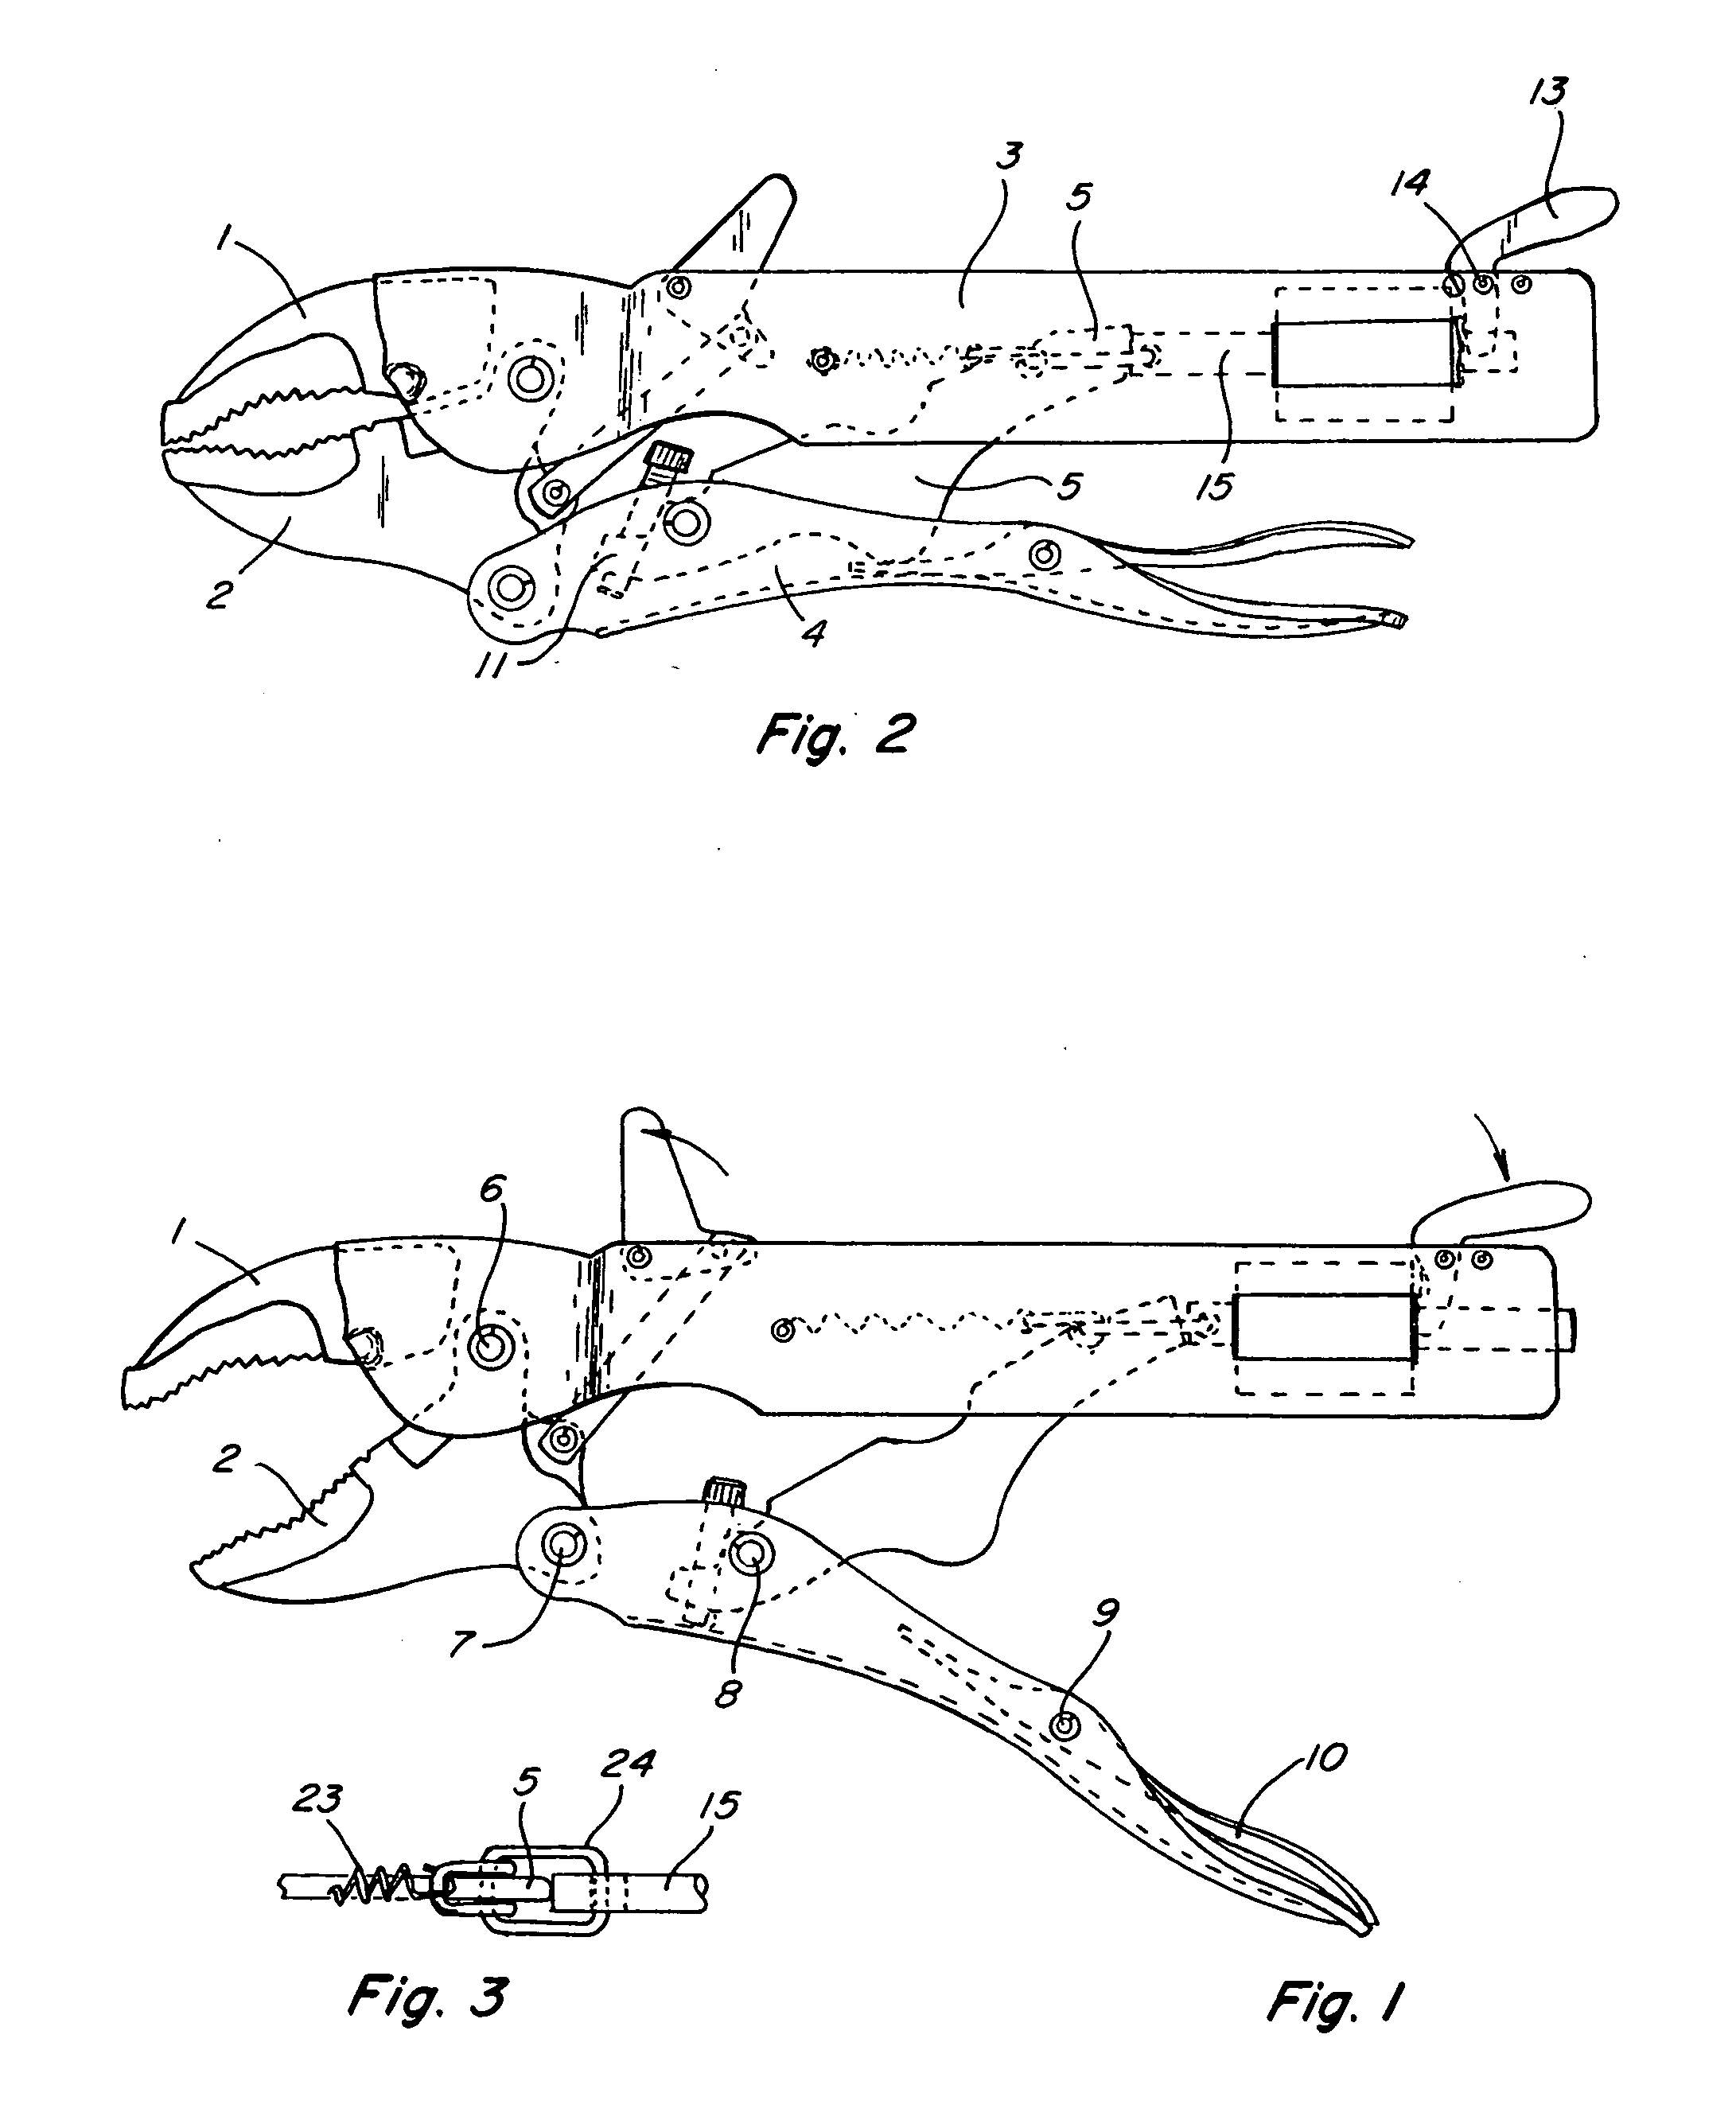 Automatic sizing one-handed locking pliers